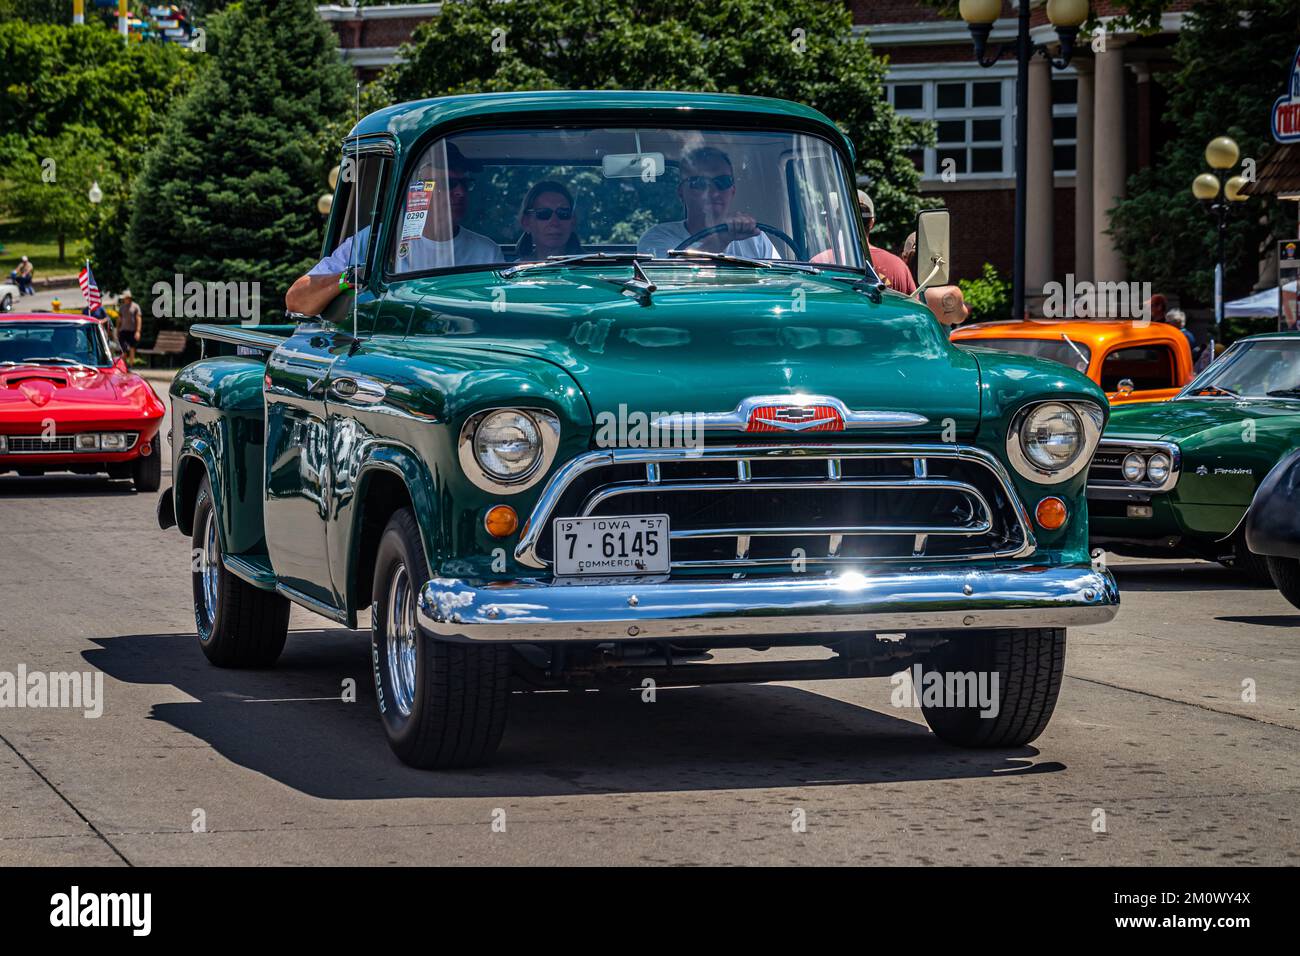 Des Moines, IA - July 03, 2022: Wide angle front view of a 1957 Chevrolet 3200 Pickup Truck at a local car show Stock Photo